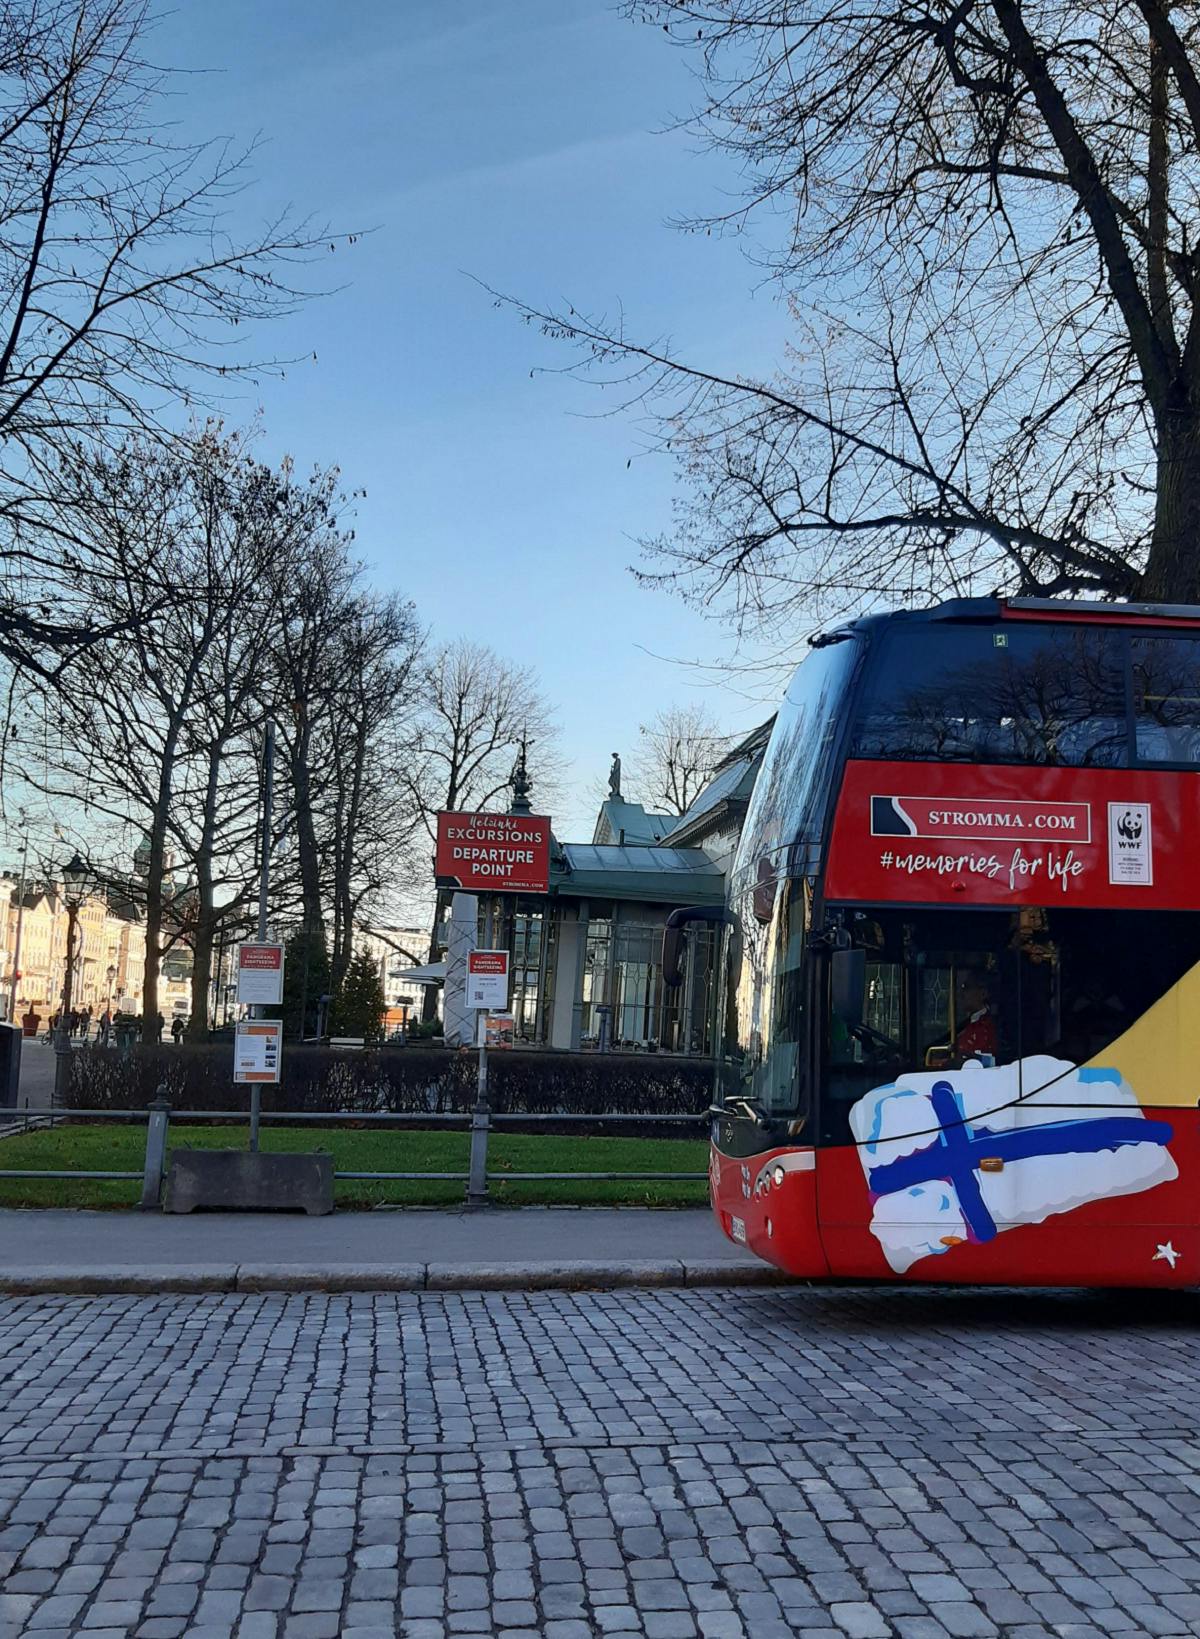 Helsinki Panorama Sightseeing, bus tour with audio guide